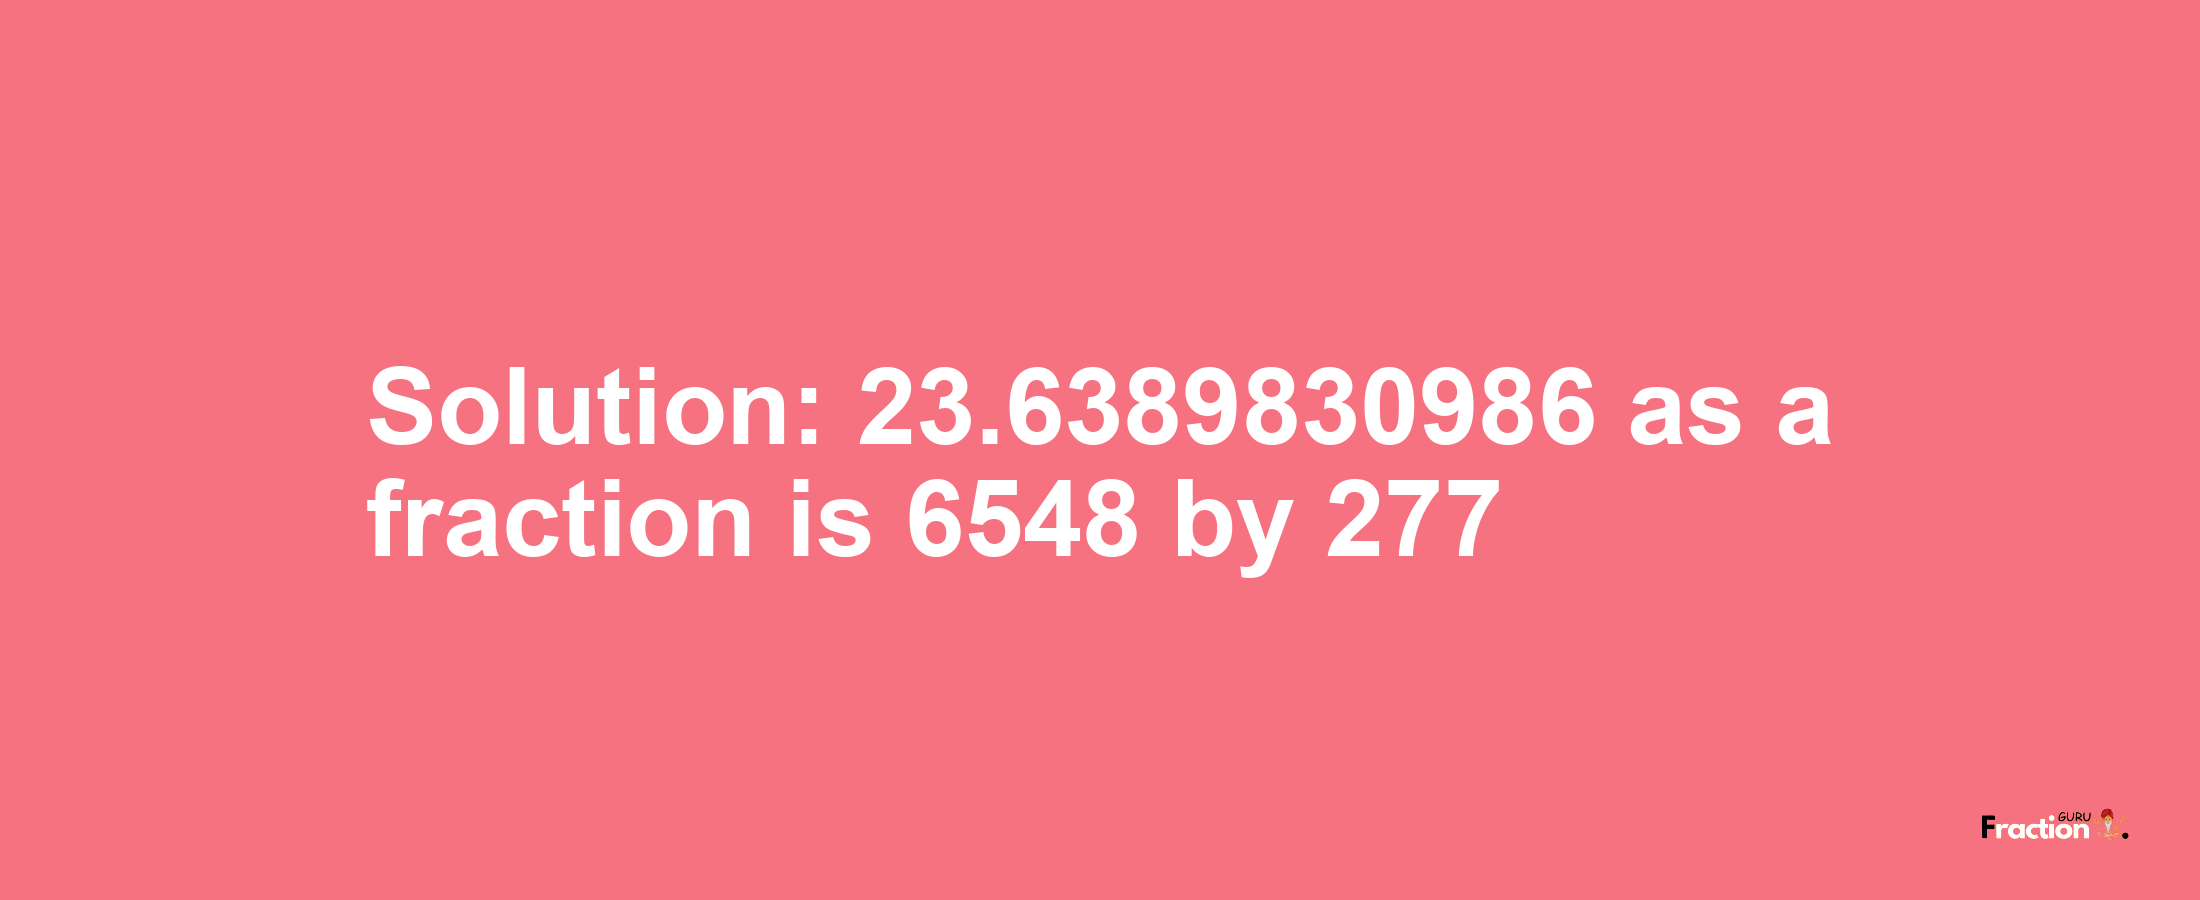 Solution:23.6389830986 as a fraction is 6548/277